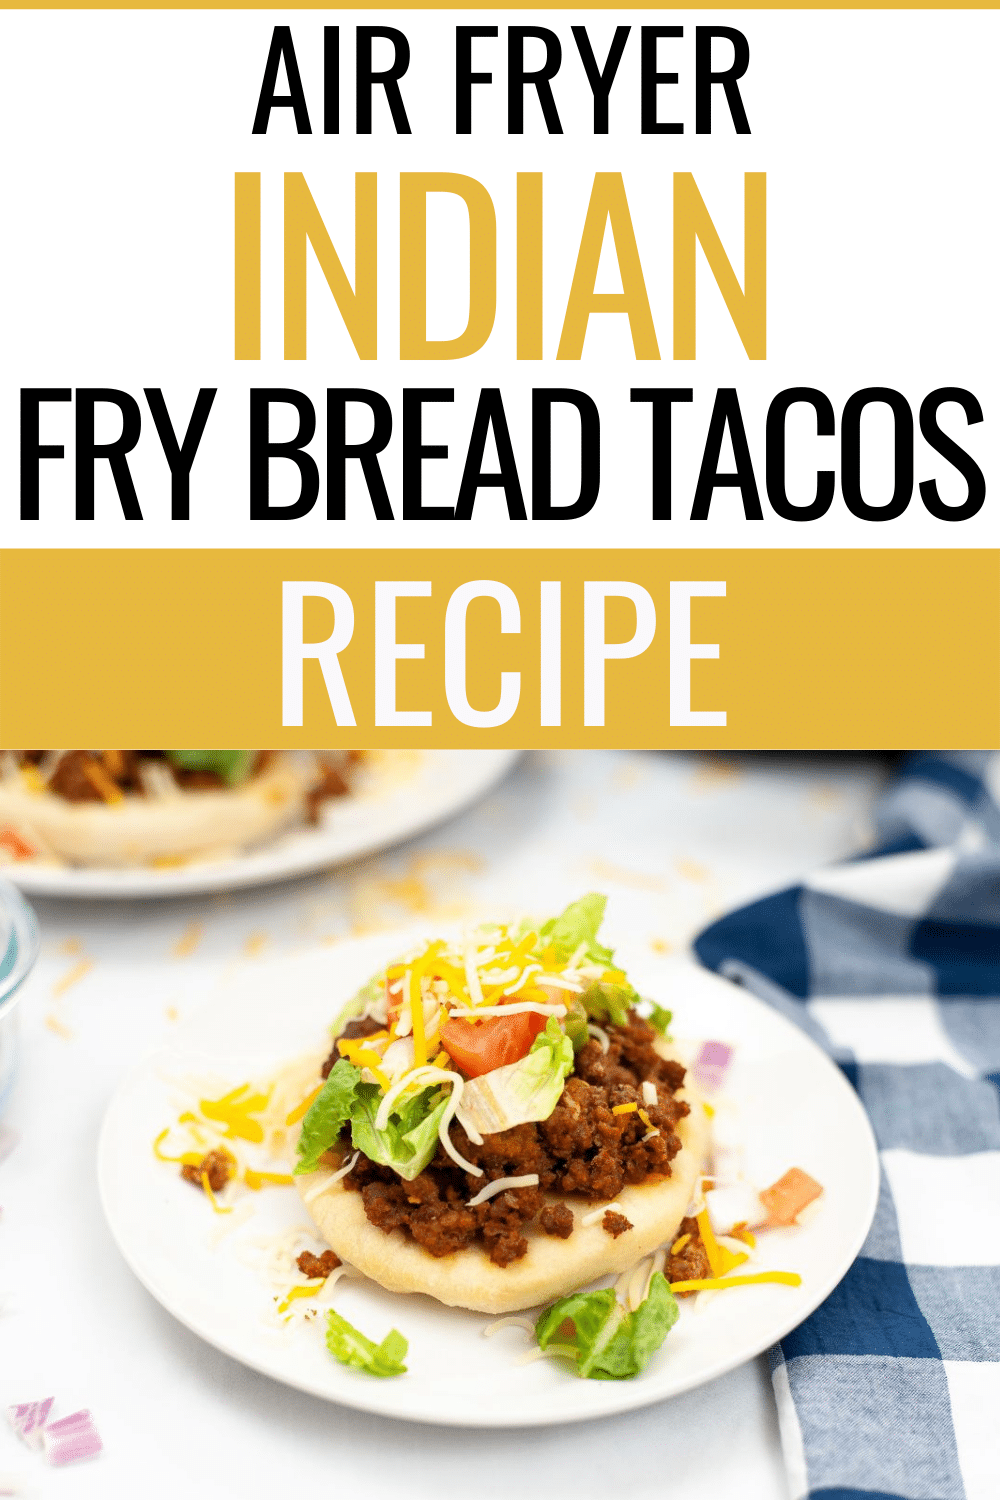 Air Fryer Indian Fry Bread Tacos are a southwestern staple that your entire family is going to love. They make an excellent meal or snack. #airfryer #indianfrybread #tacos #southwestern #recipe via @wondermomwannab